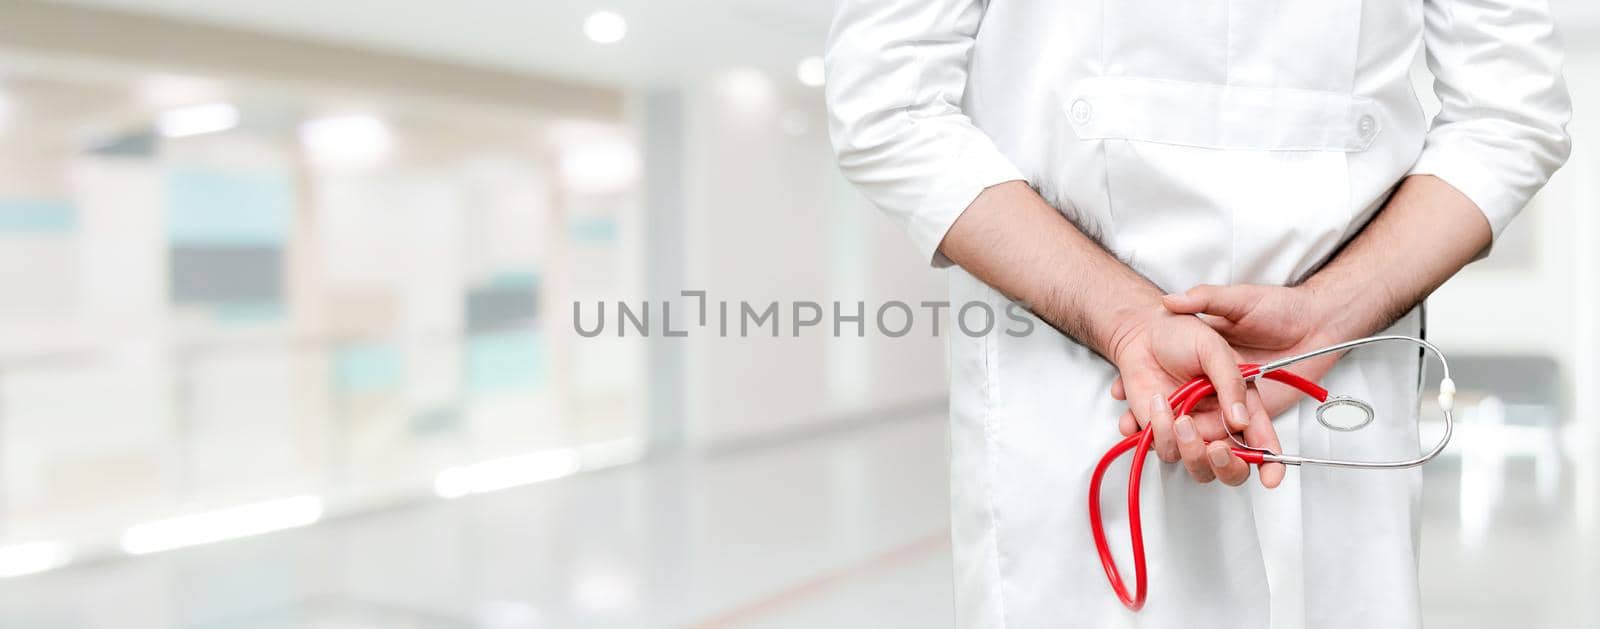 Young male doctor working at the hospital. Medical healthcare and doctor staff service.